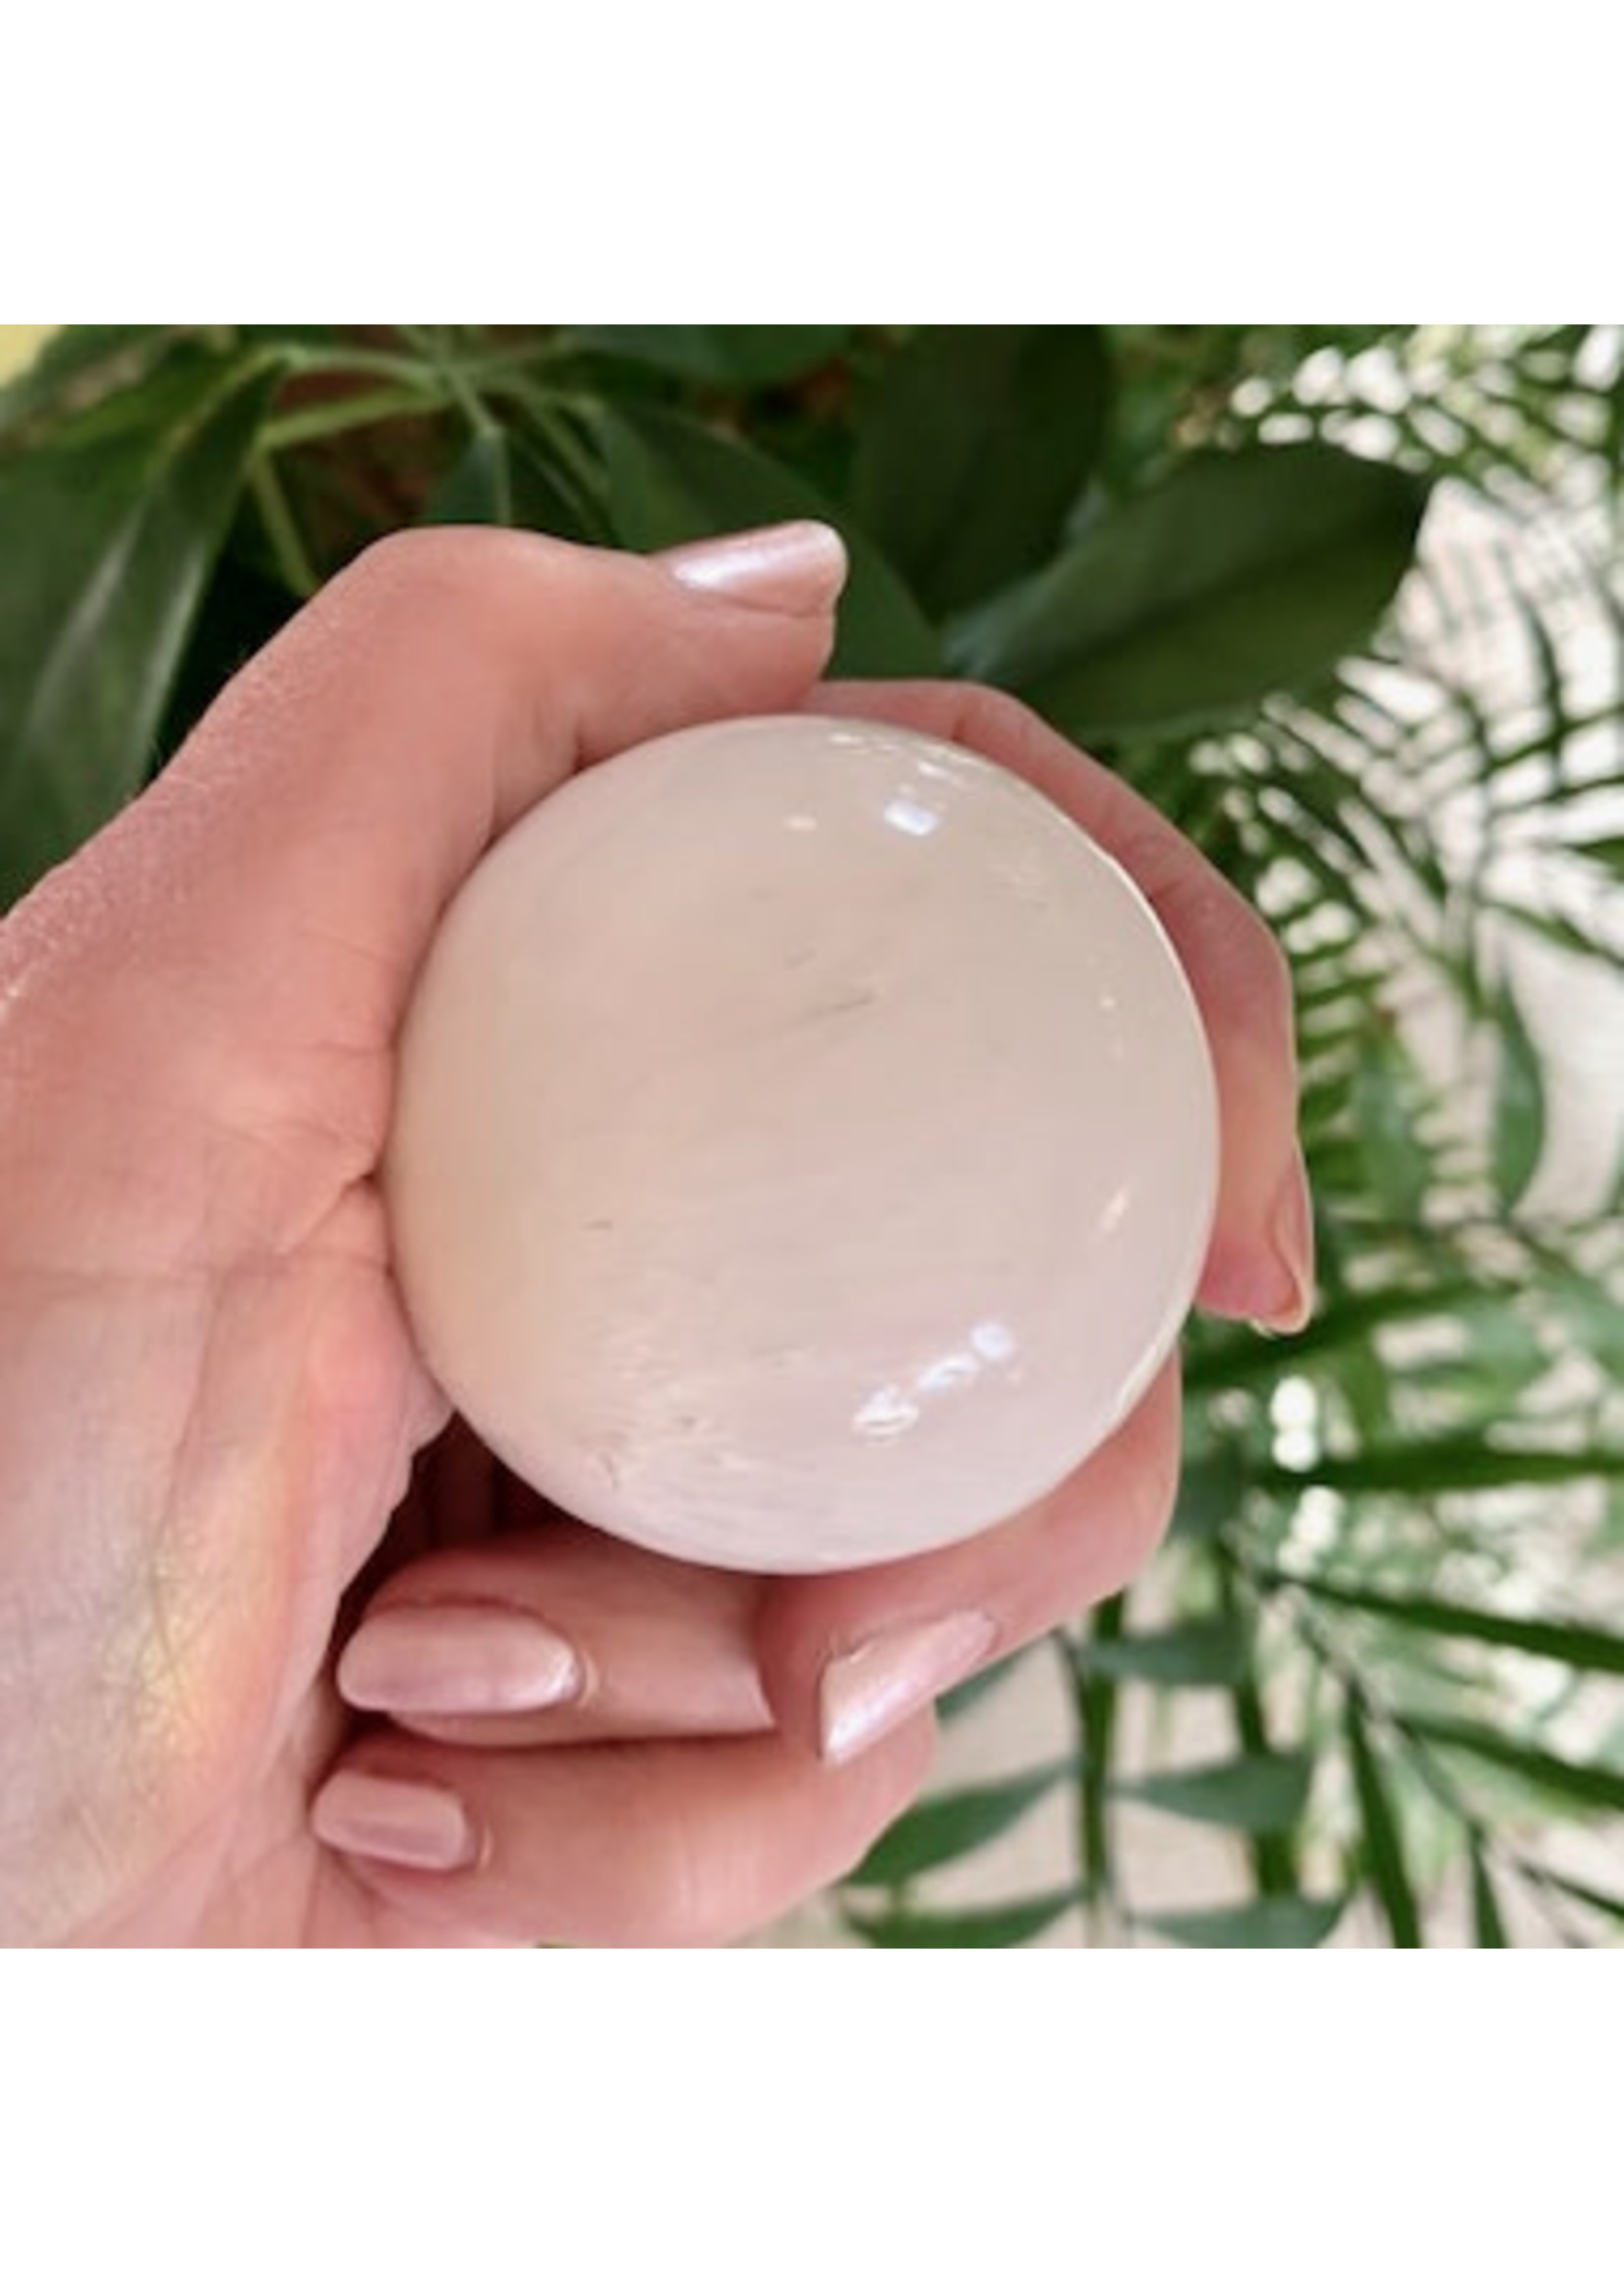 Scolecite spheres for 360 degrees of kindness